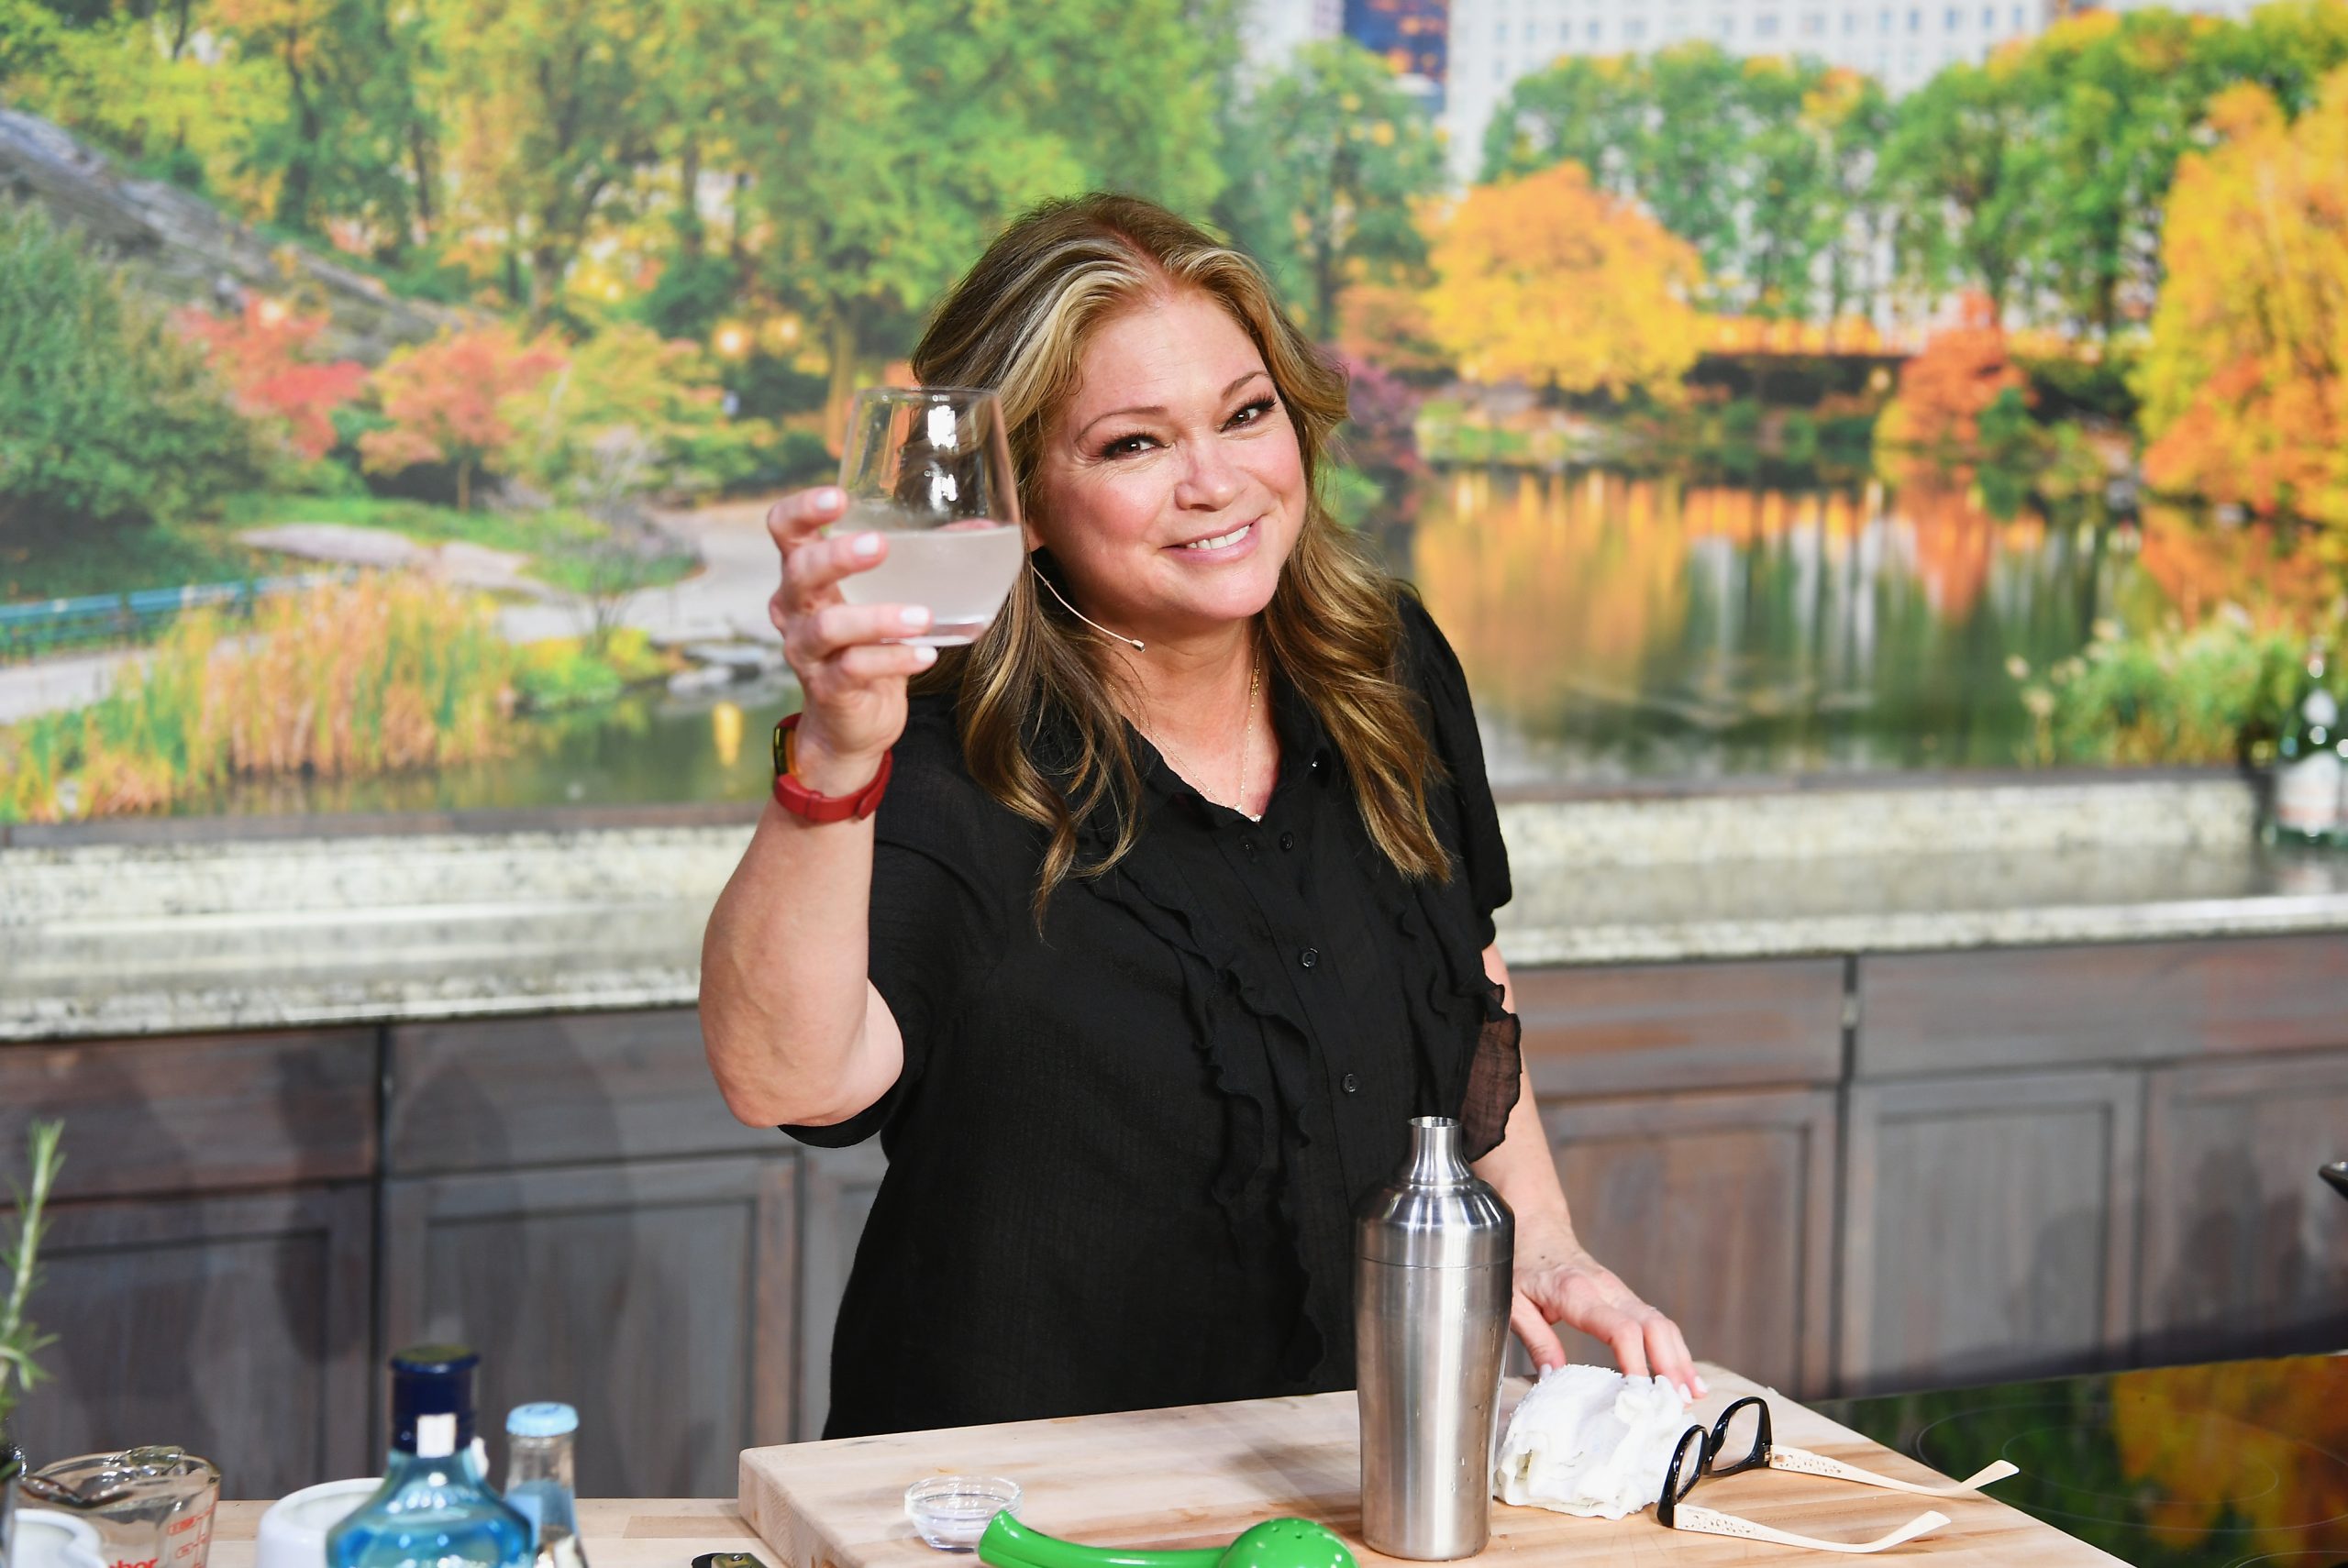 Food Network television personality Valerie Bertinelli